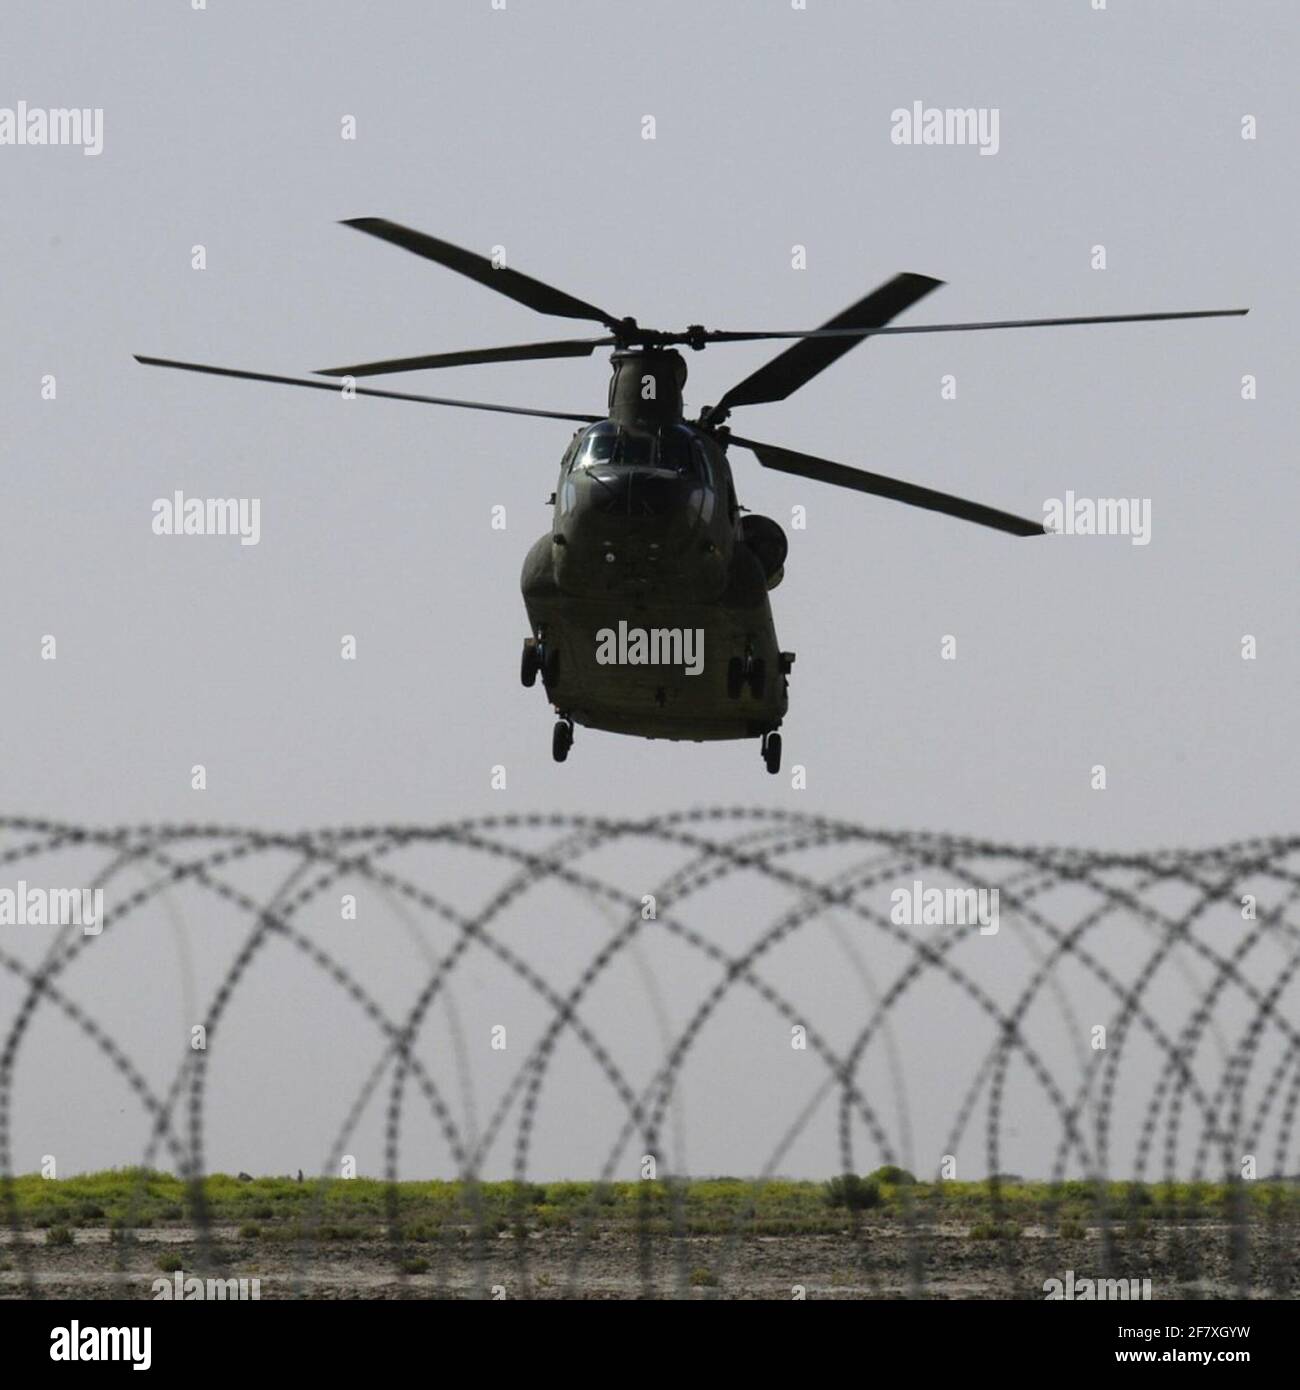 A Boeing CH-47d Chinook transport helicopter. Stock Photo